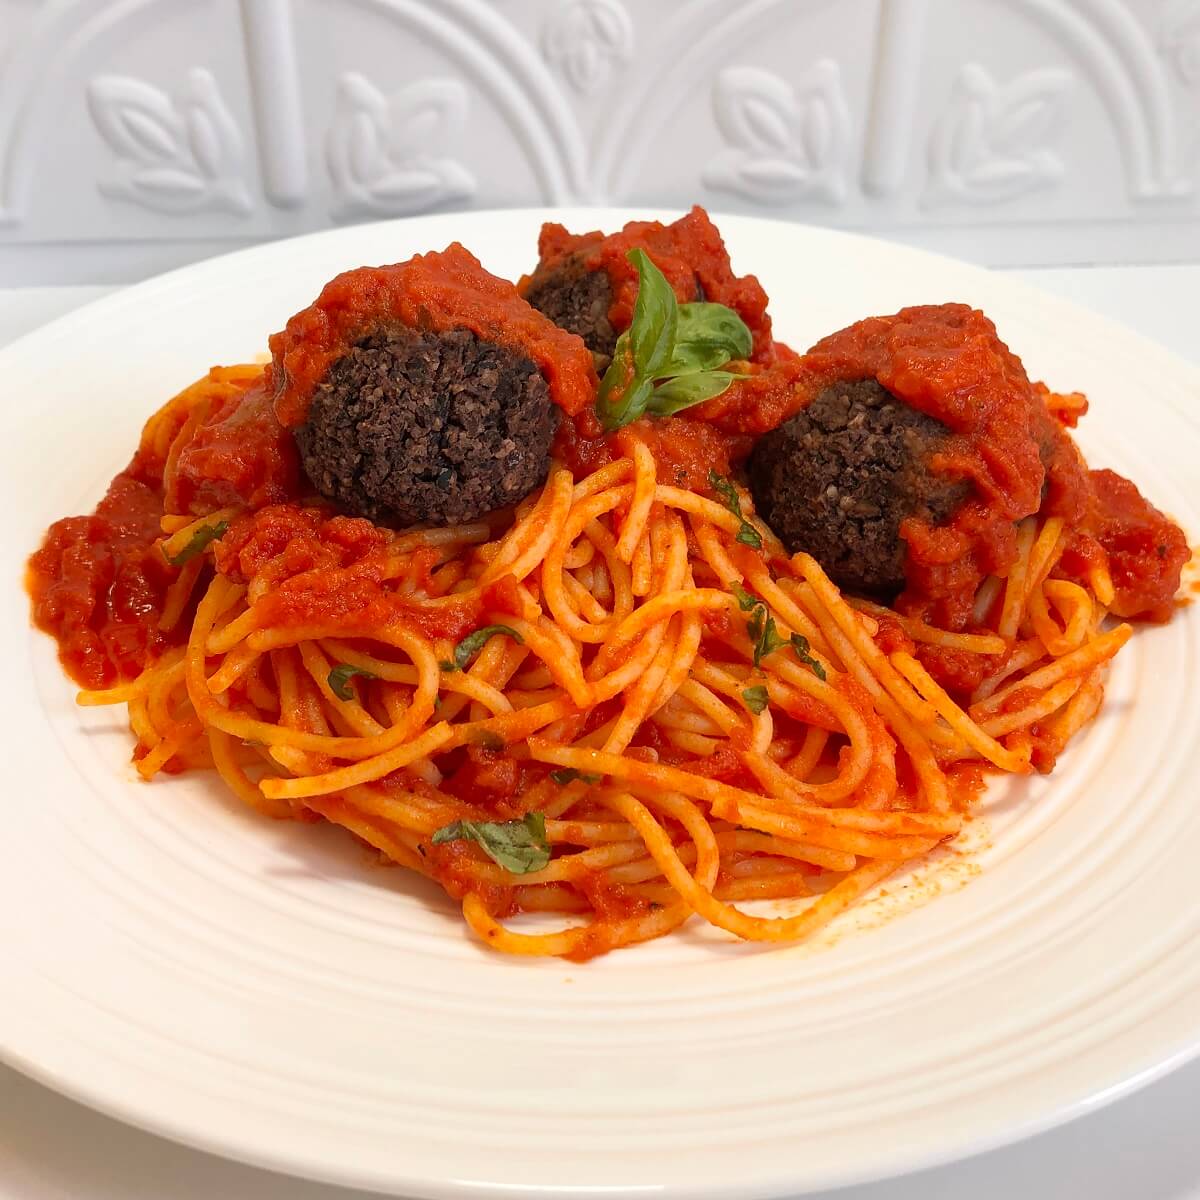 Meatballs and pasta on a white plate.